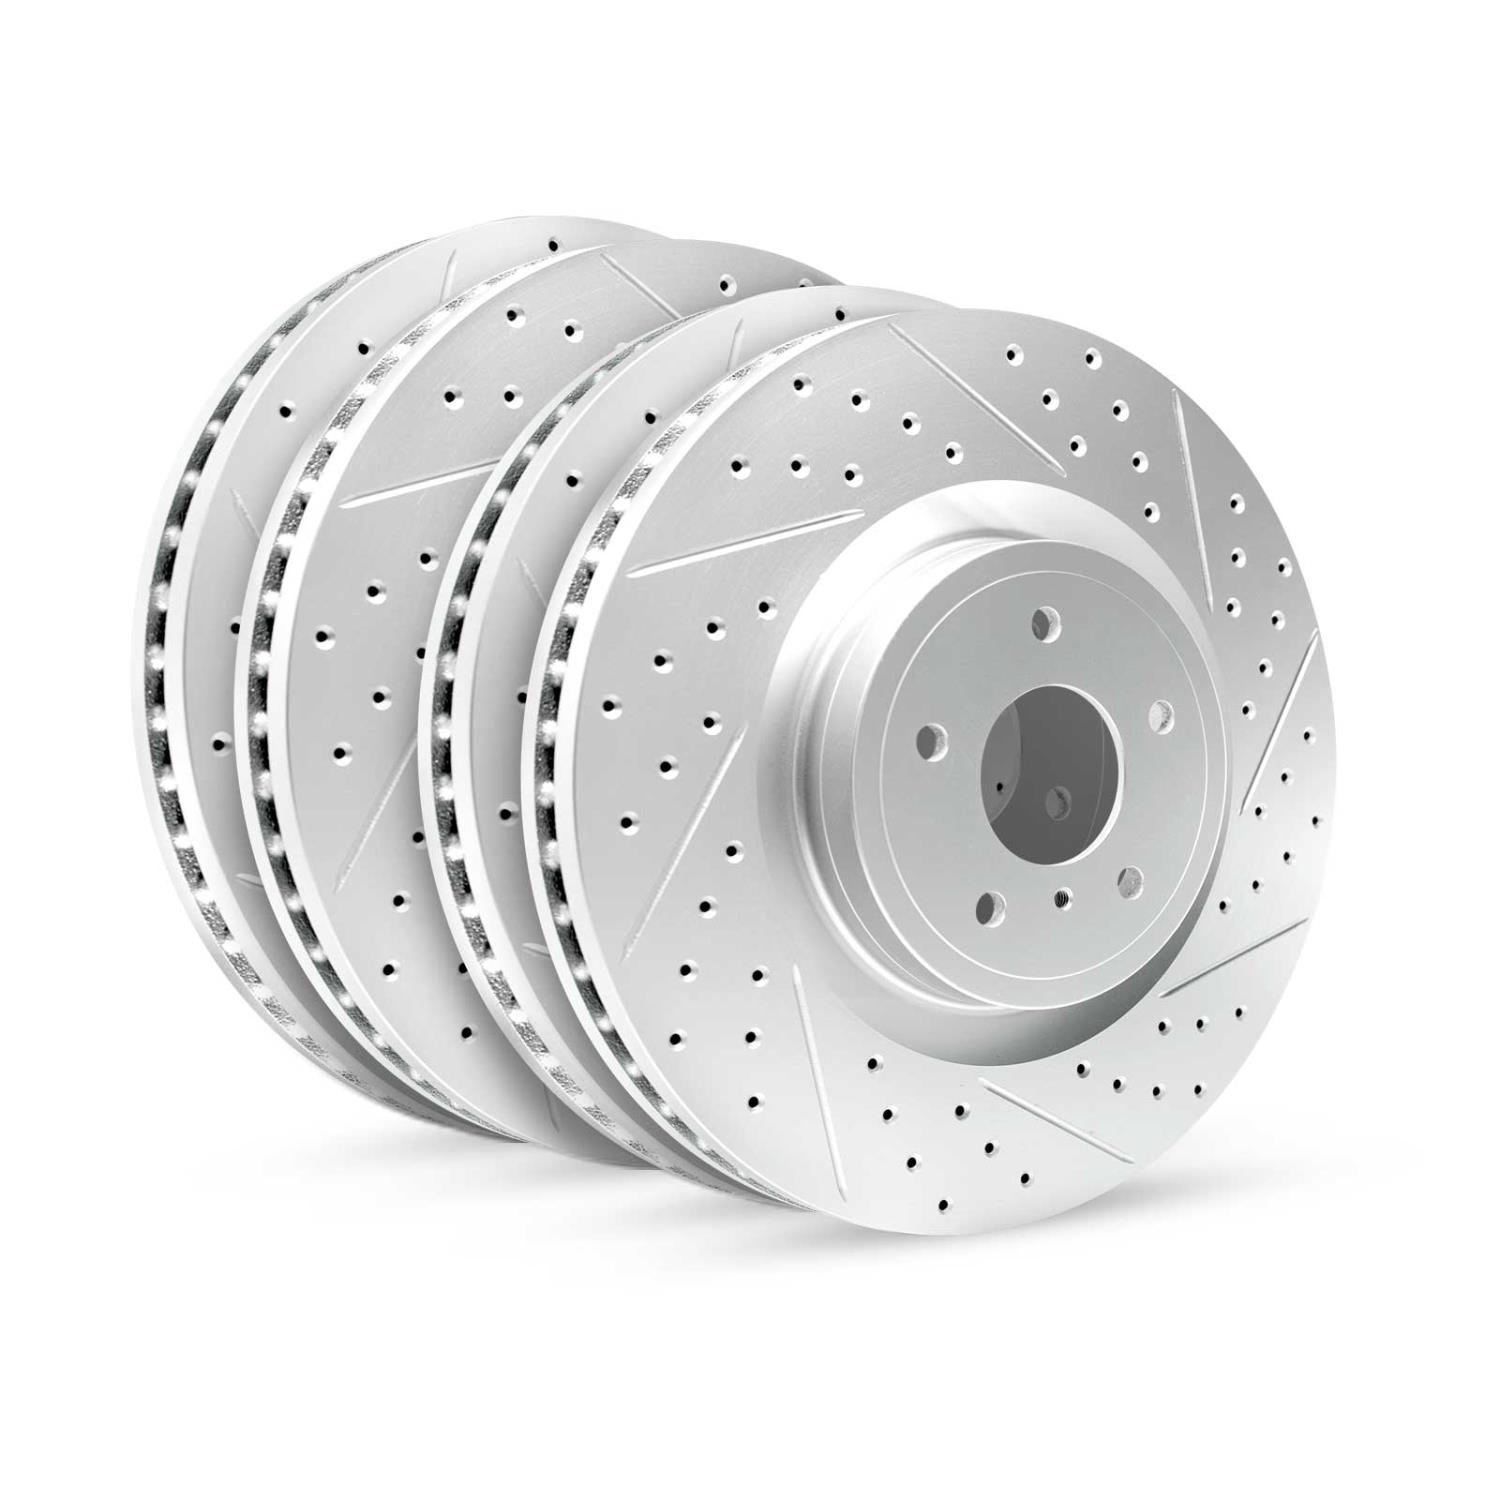 GEO-Carbon Drilled/Slotted Rotors, 2008-2015 Infiniti/Nissan, Position: Front/Rear